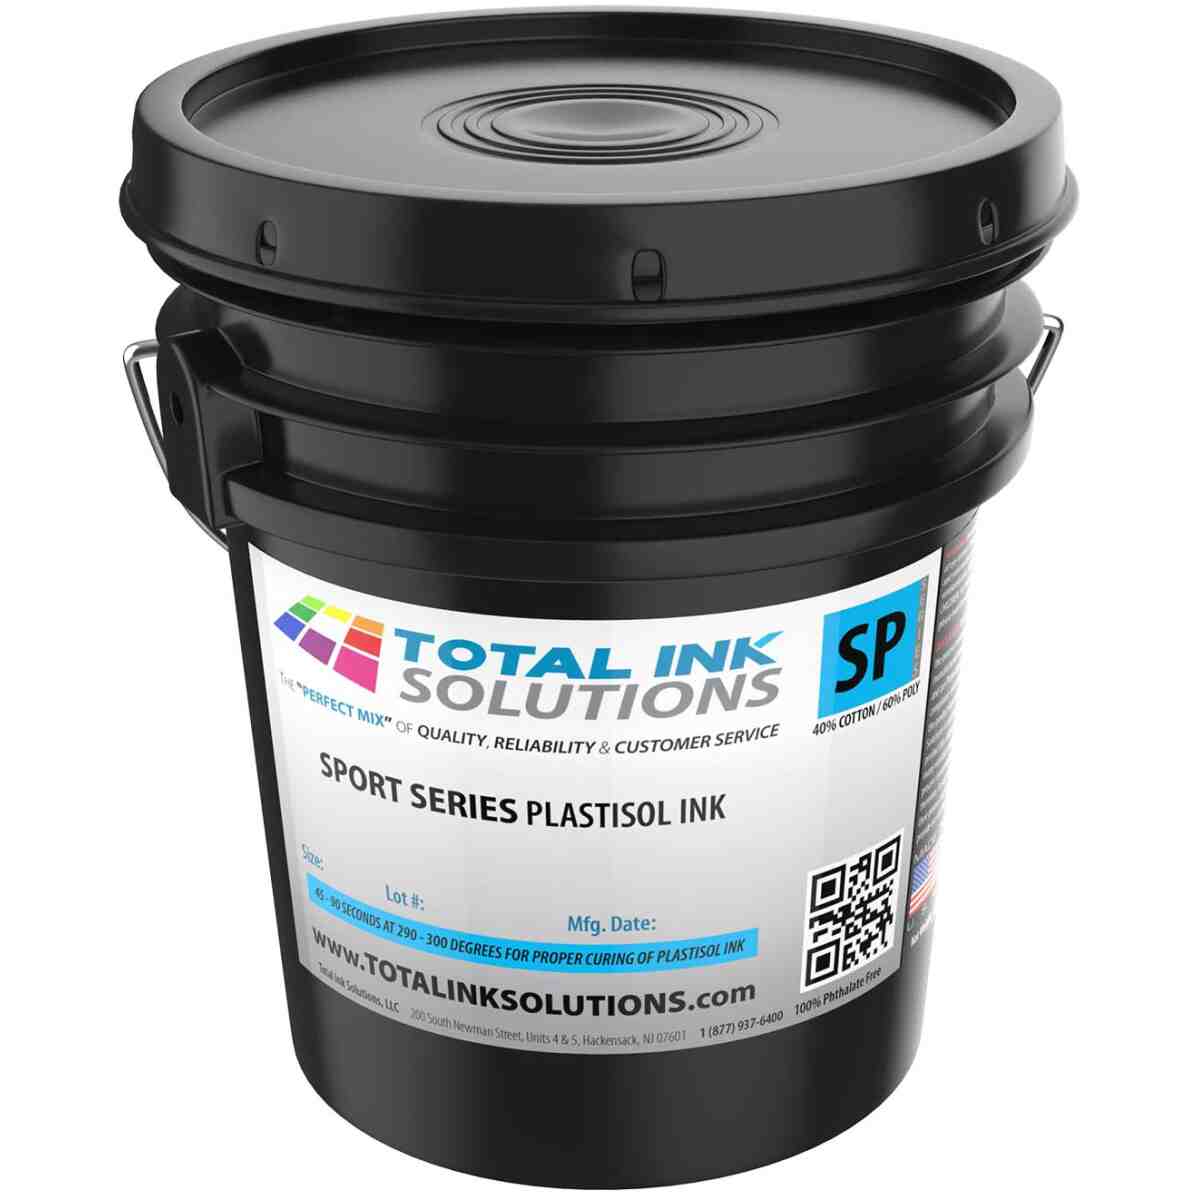 Stretchable Plastisol Ink - 5 Gallon TOTAL INK SOLUTIONS®